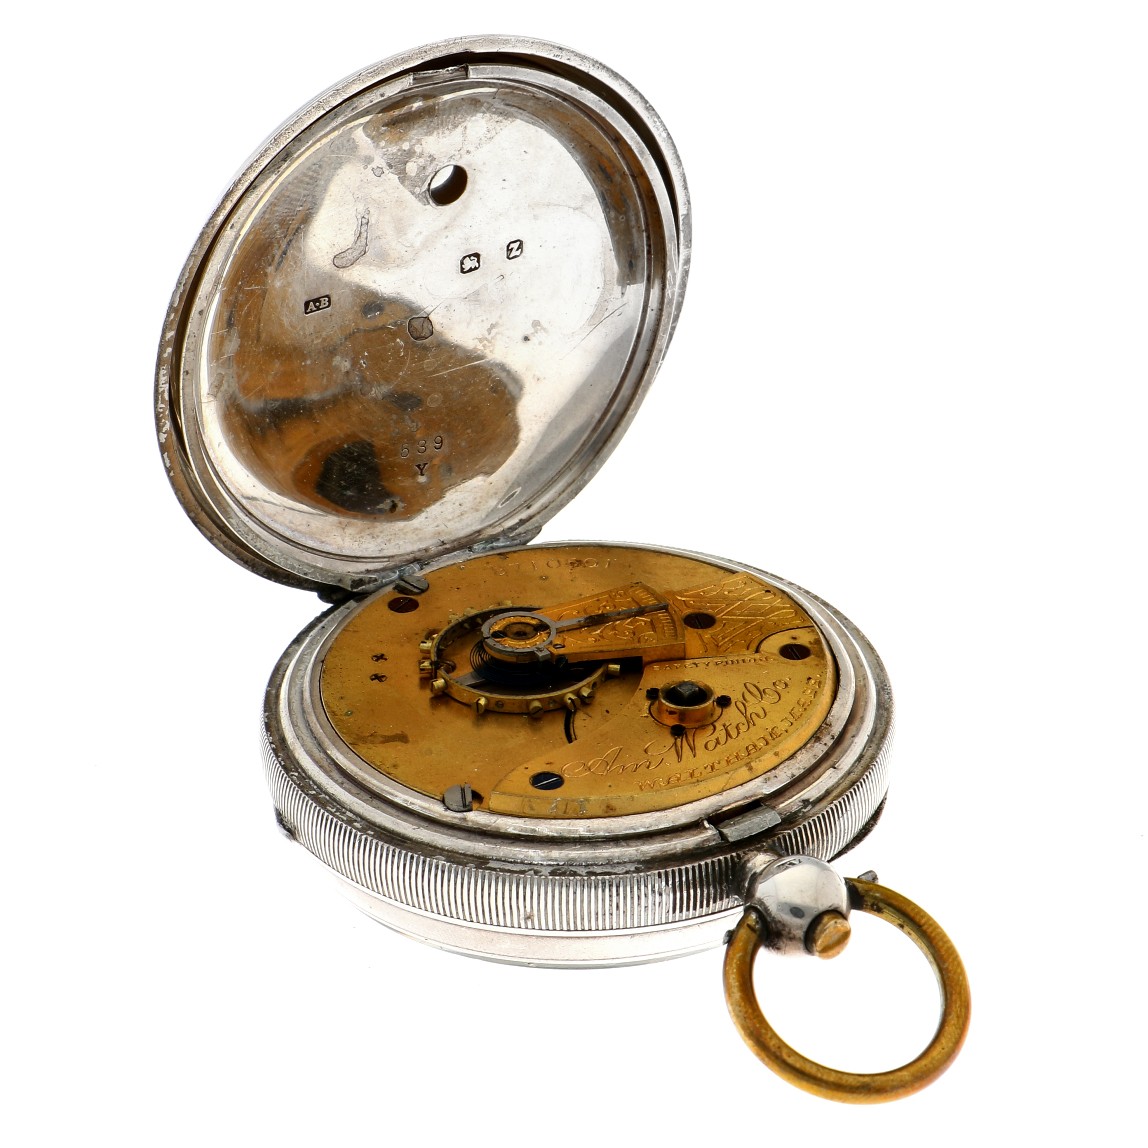 No Reserve - Waltham Mass. 925/1000 silver - Men's pocketwatch - approx. 1800 - 1850. - Image 5 of 5